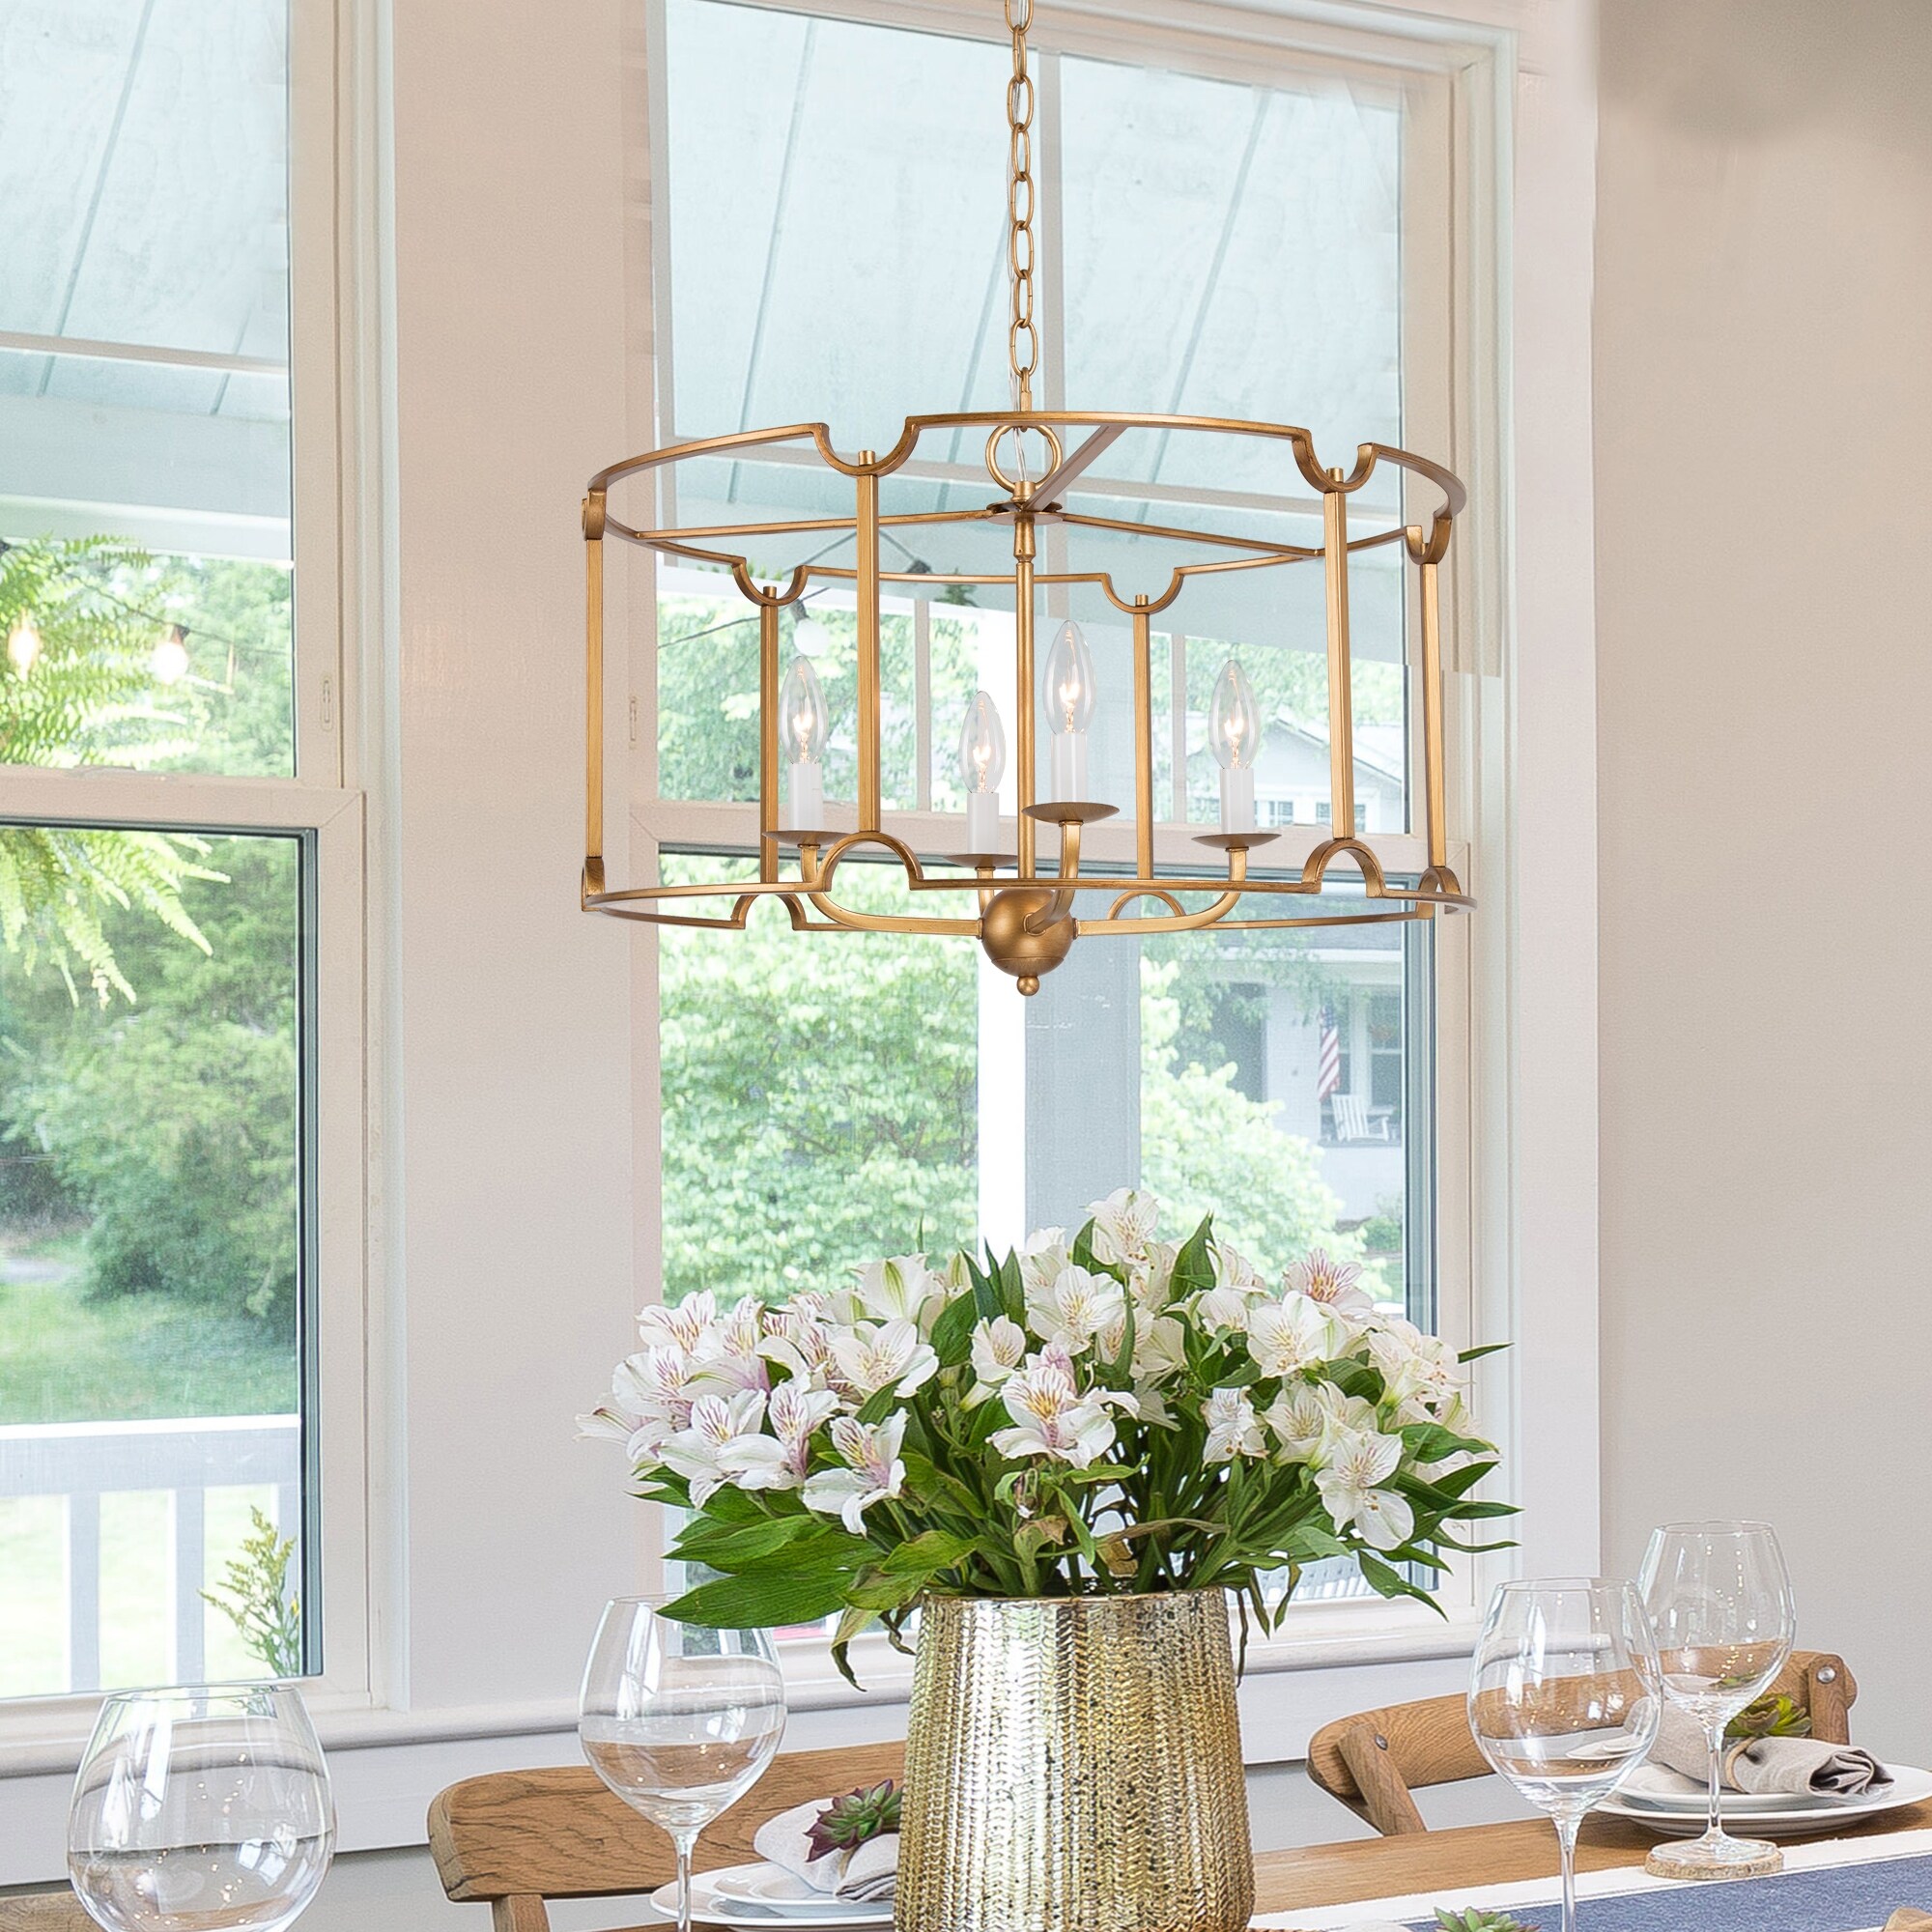 https://ak1.ostkcdn.com/images/products/is/images/direct/af544851a0cbe99deb0814fe8cc5bf6134279fe3/Alisar-French-Country-Mid-century-Modern-Drum-Chandelier-Farmhouse-Large-Lantern-Dining-Room-Lighting.jpg